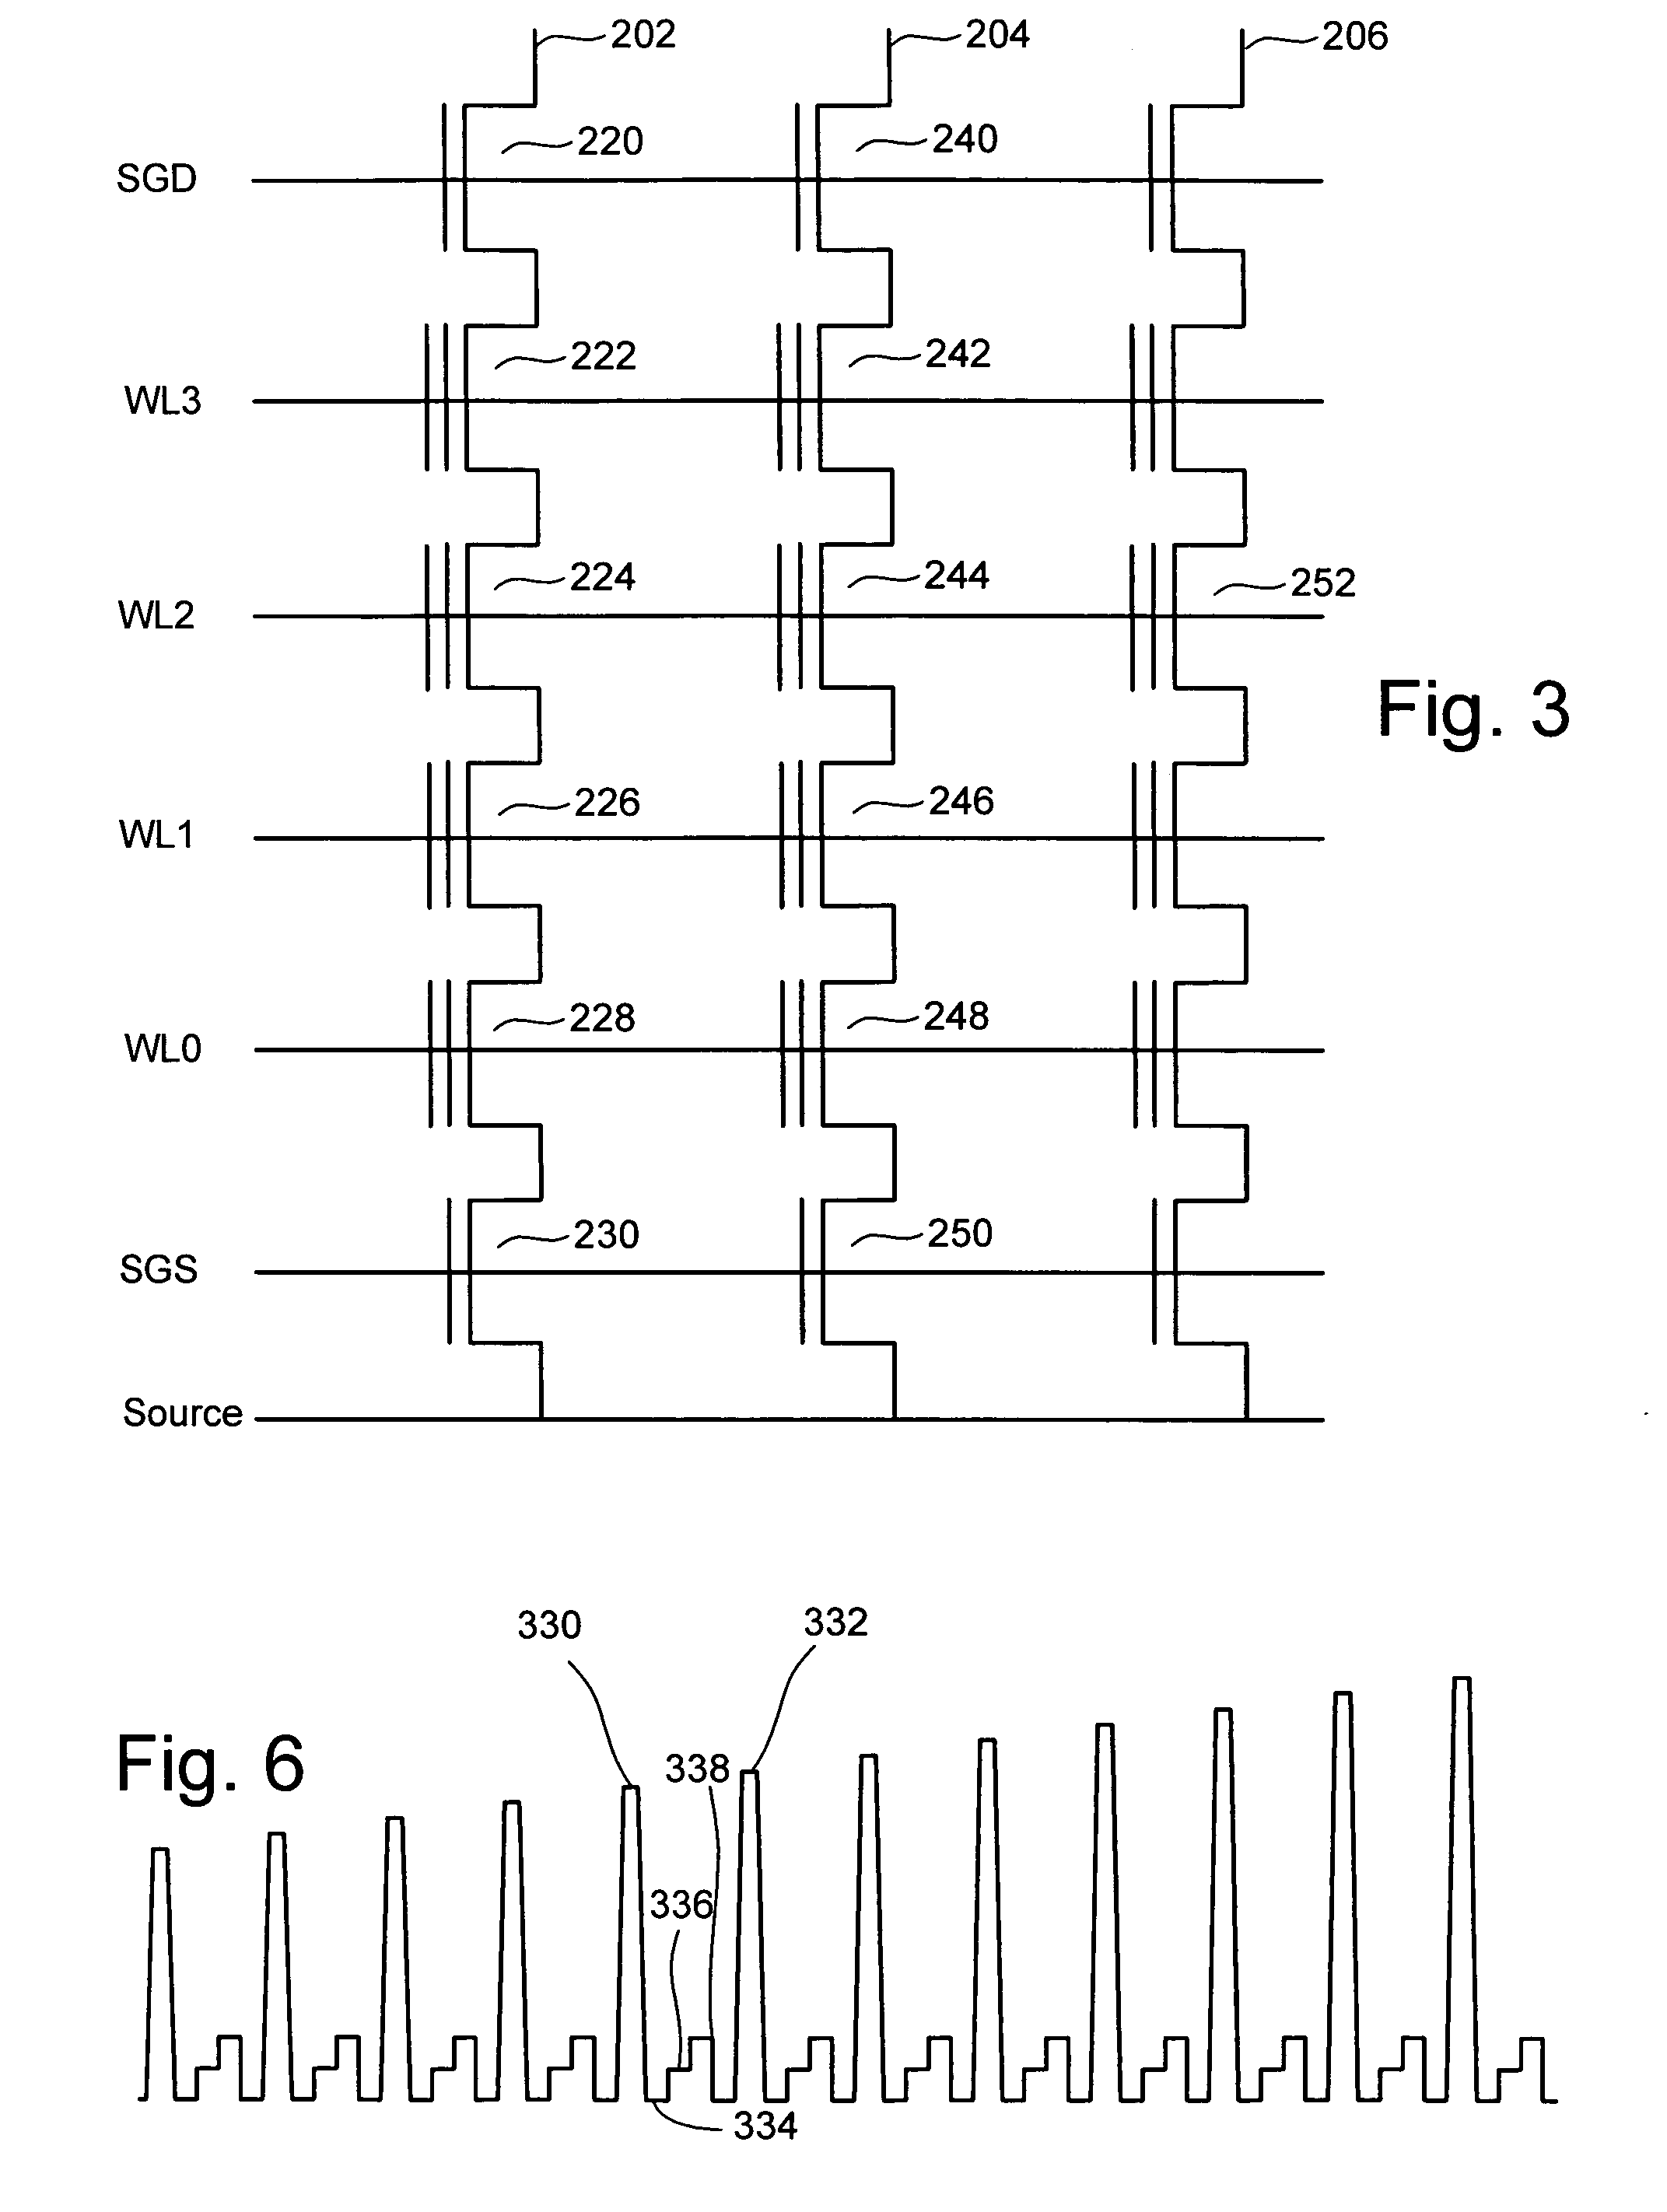 Soft programming non-volatile memory utilizing individual verification and additional soft programming of subsets of memory cells